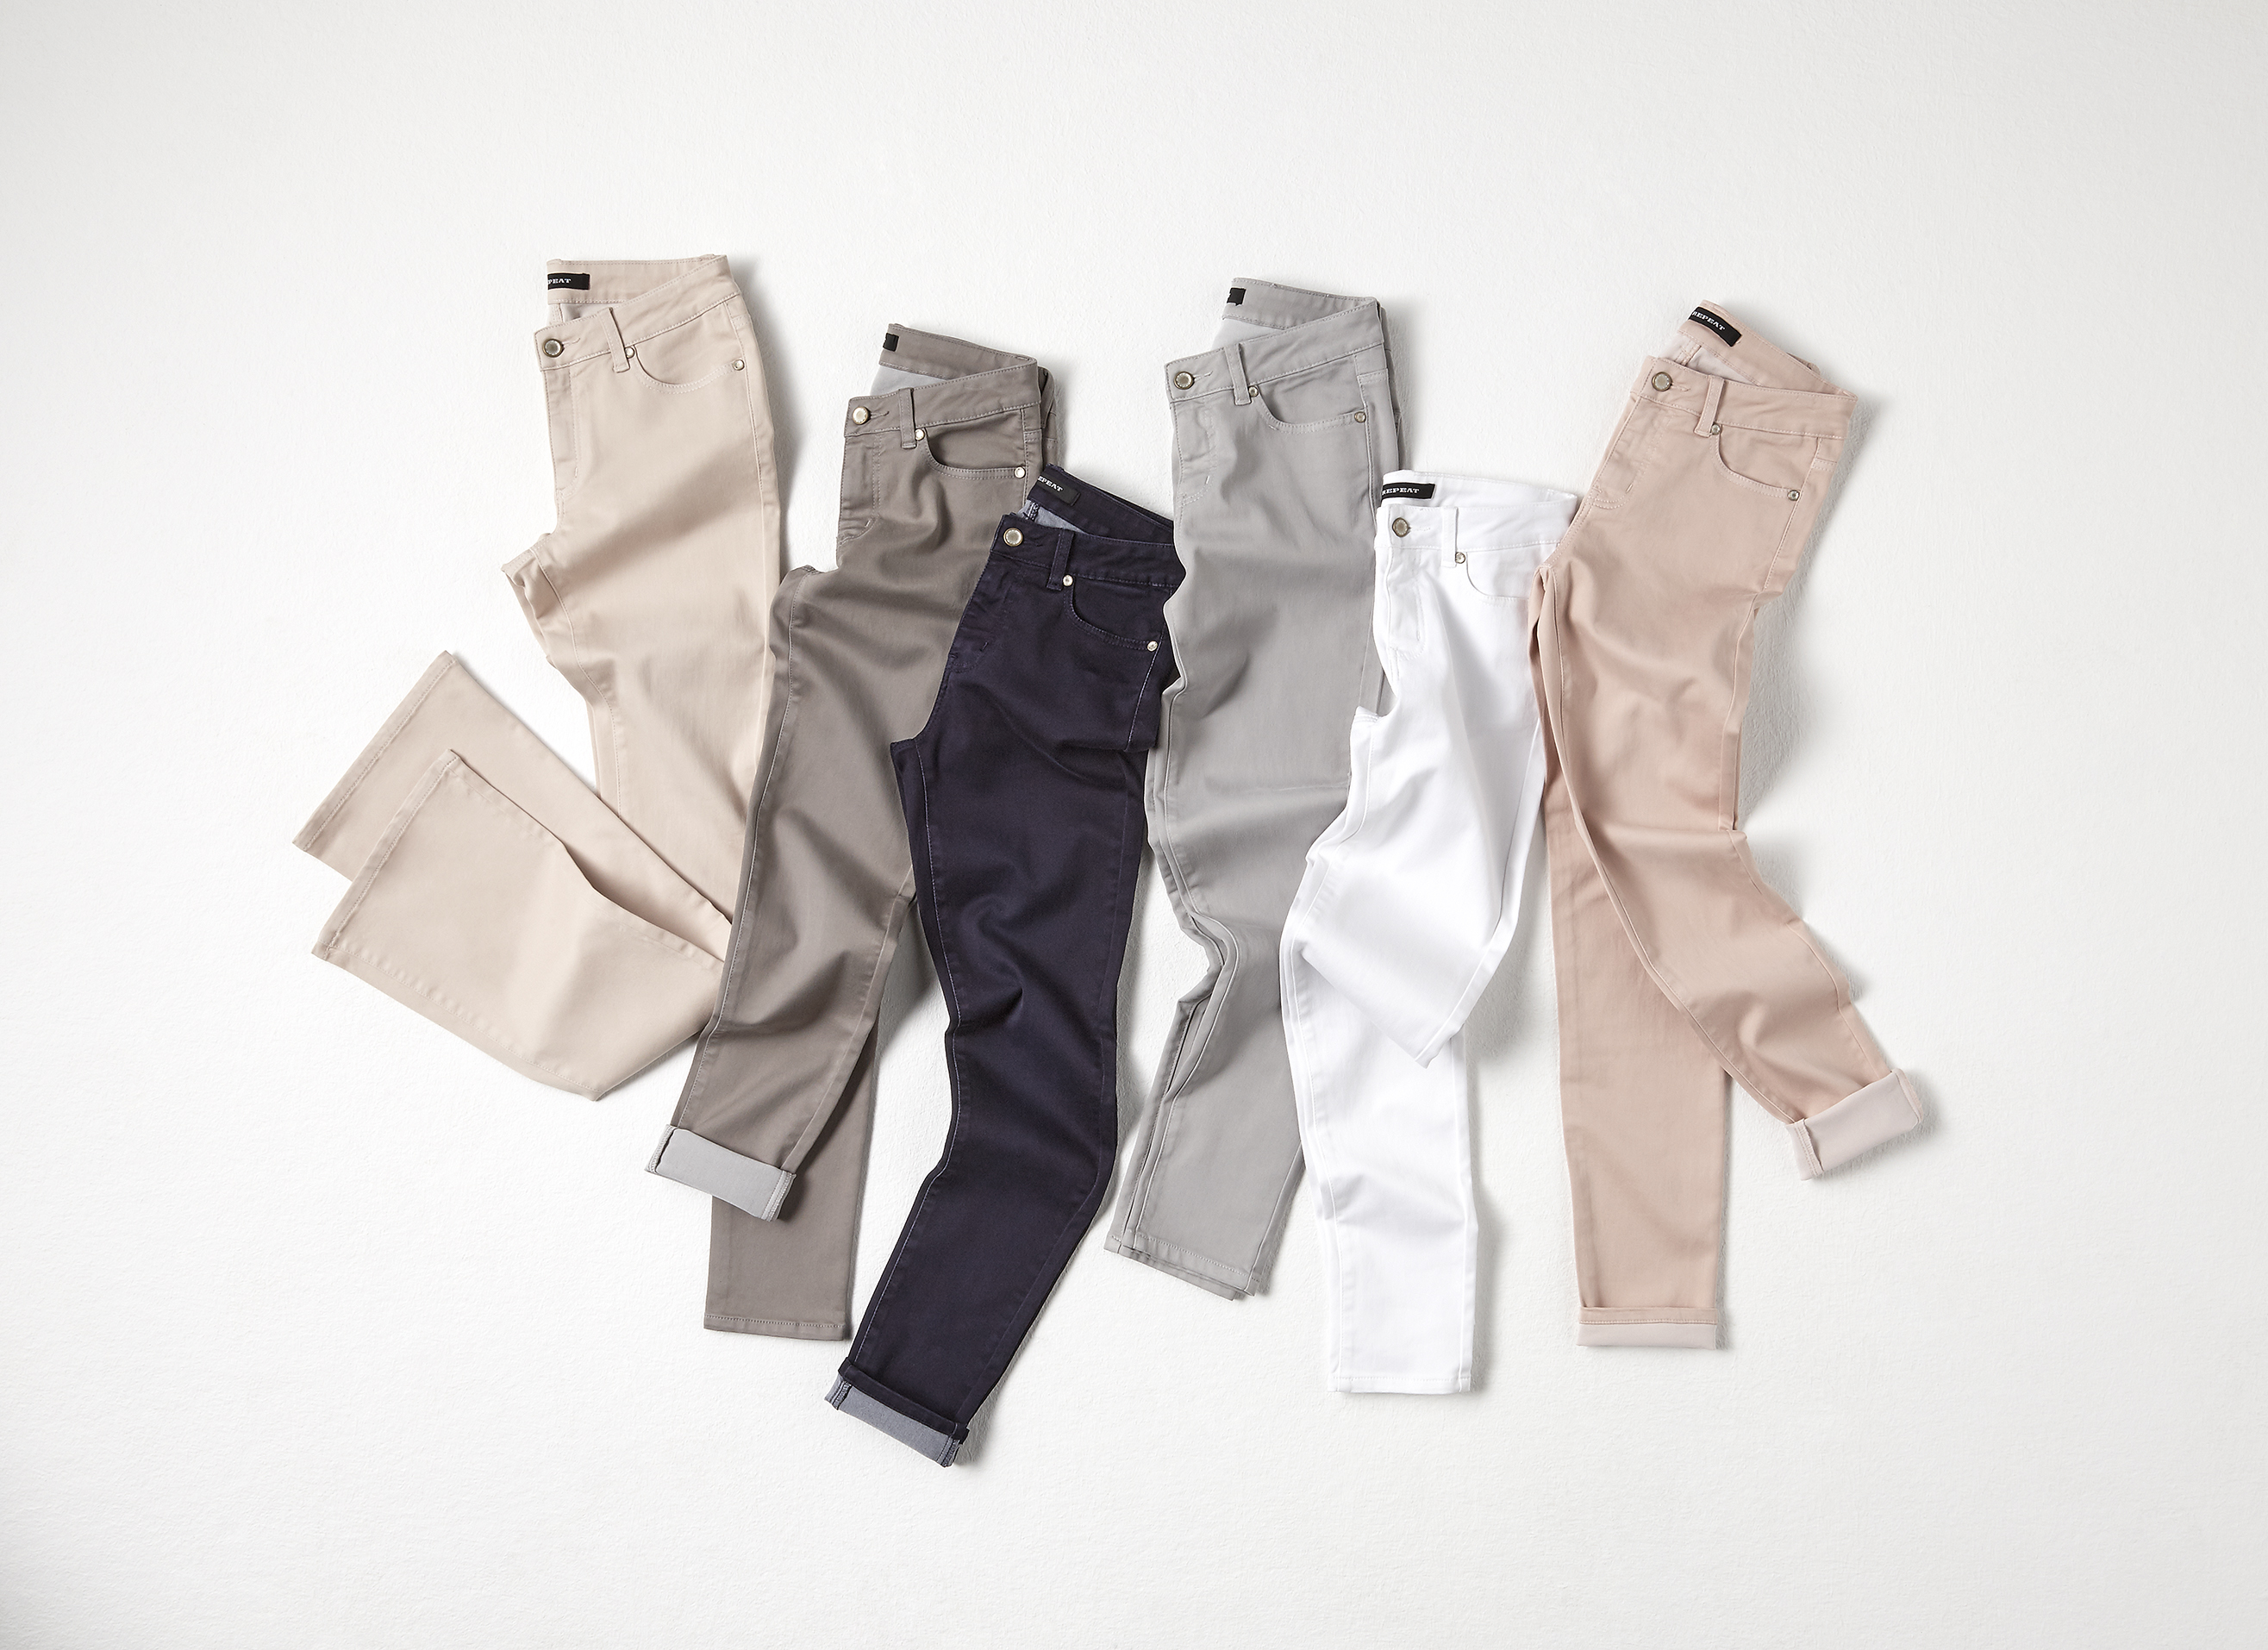 The Best Materials for Comfortable and Durable Pants